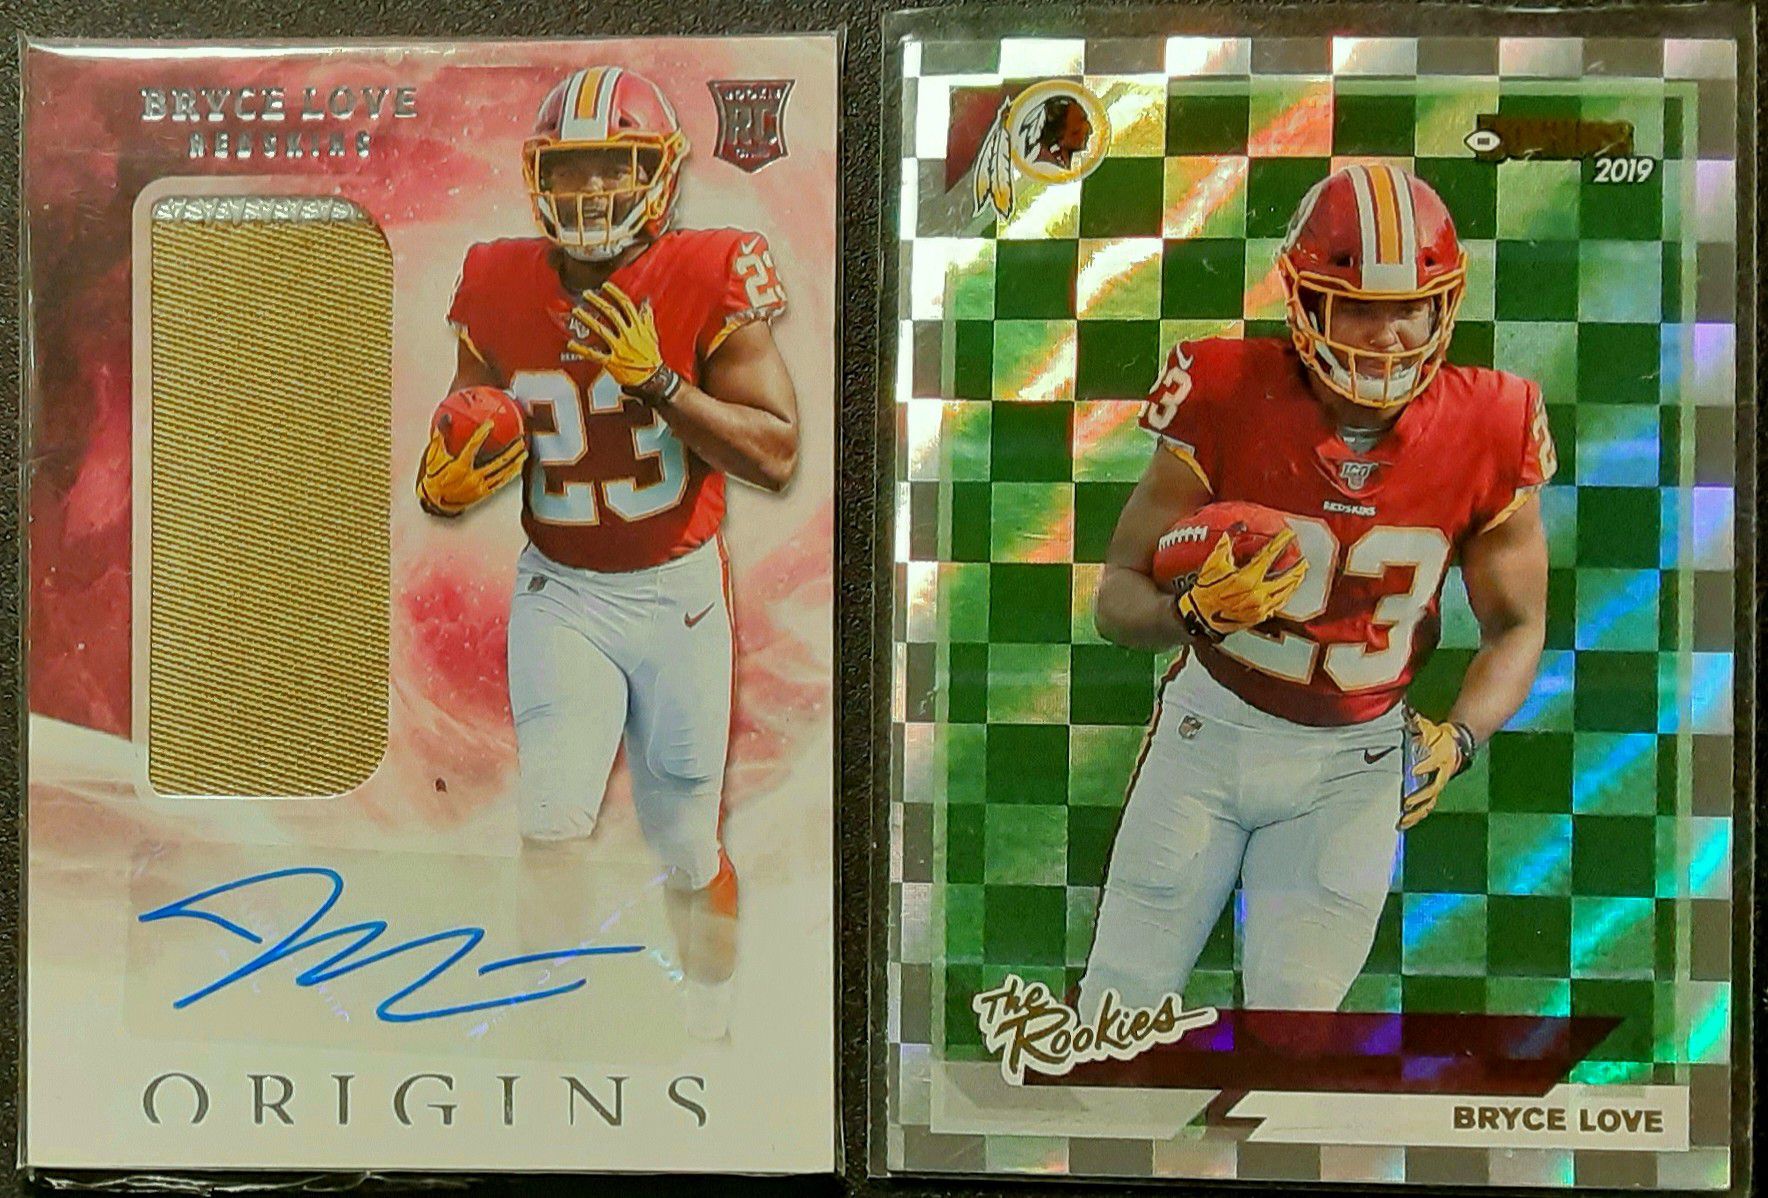 BRYCE LOVE ROOKIE AUTO LOT OF 2! 2019 PANINI ORIGINS ROOKIE AUTOGRAPHED 2 COLORED JUMBO JERSEY RELIC 2019 THE ROOKIES REFRACTOR WASHINGTON REDSKINS